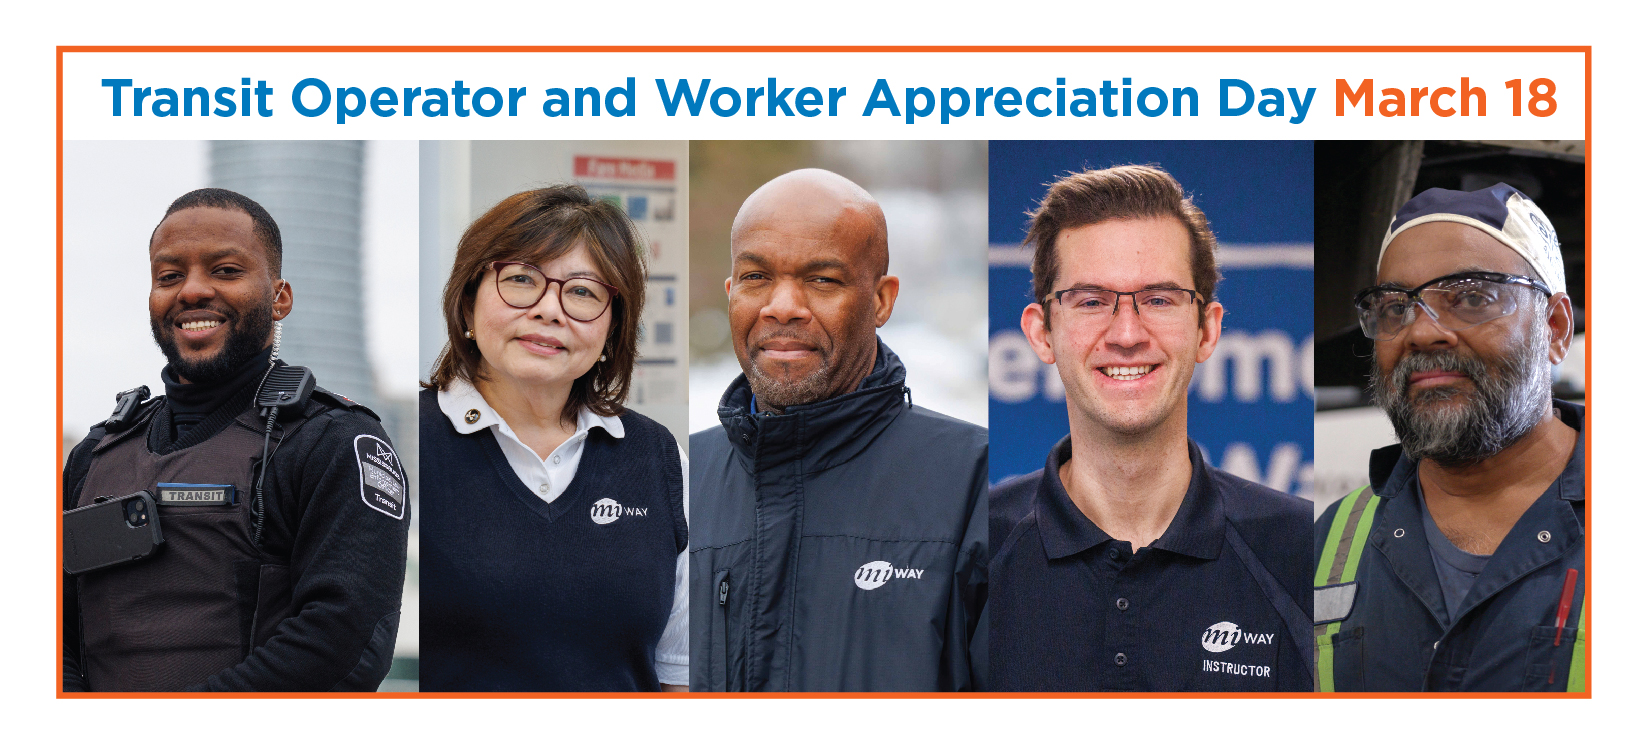 March 18 is Transit Operator and Worker Appreciation Day MiWay